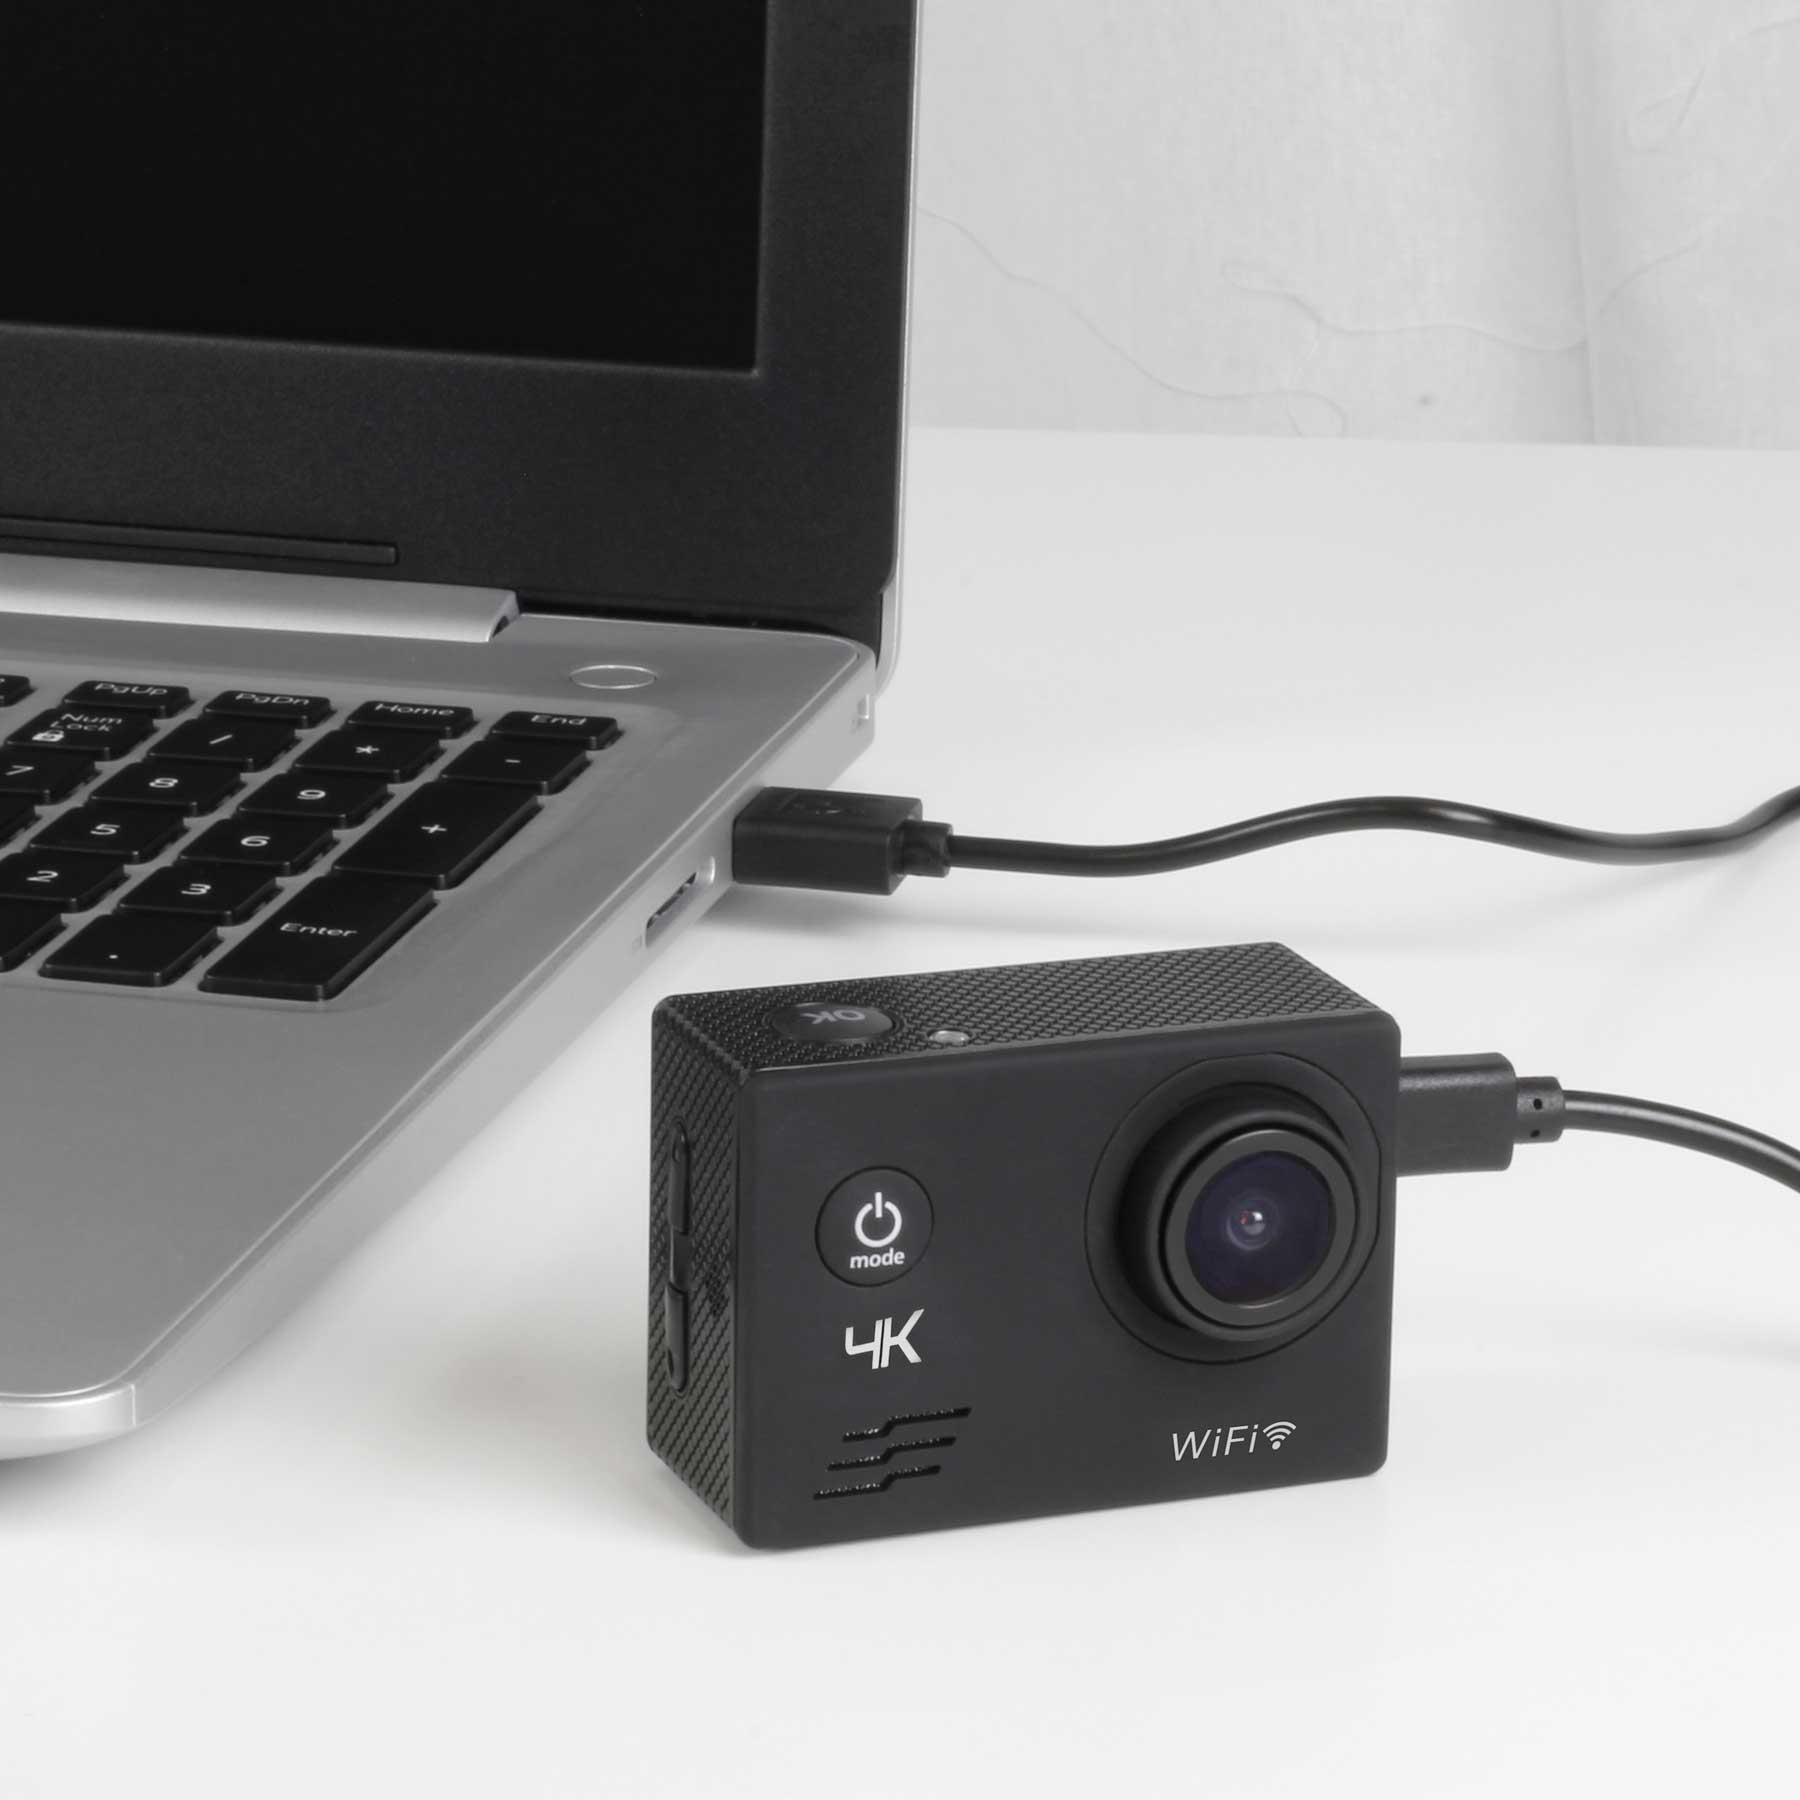 TEKCAM X360 360° Panorama High Definition Action Camera With WIFI,  1280x1042 Resolution, And 28fs Storage Ideal For Sports From Chinese Jade  Shop, $75.92